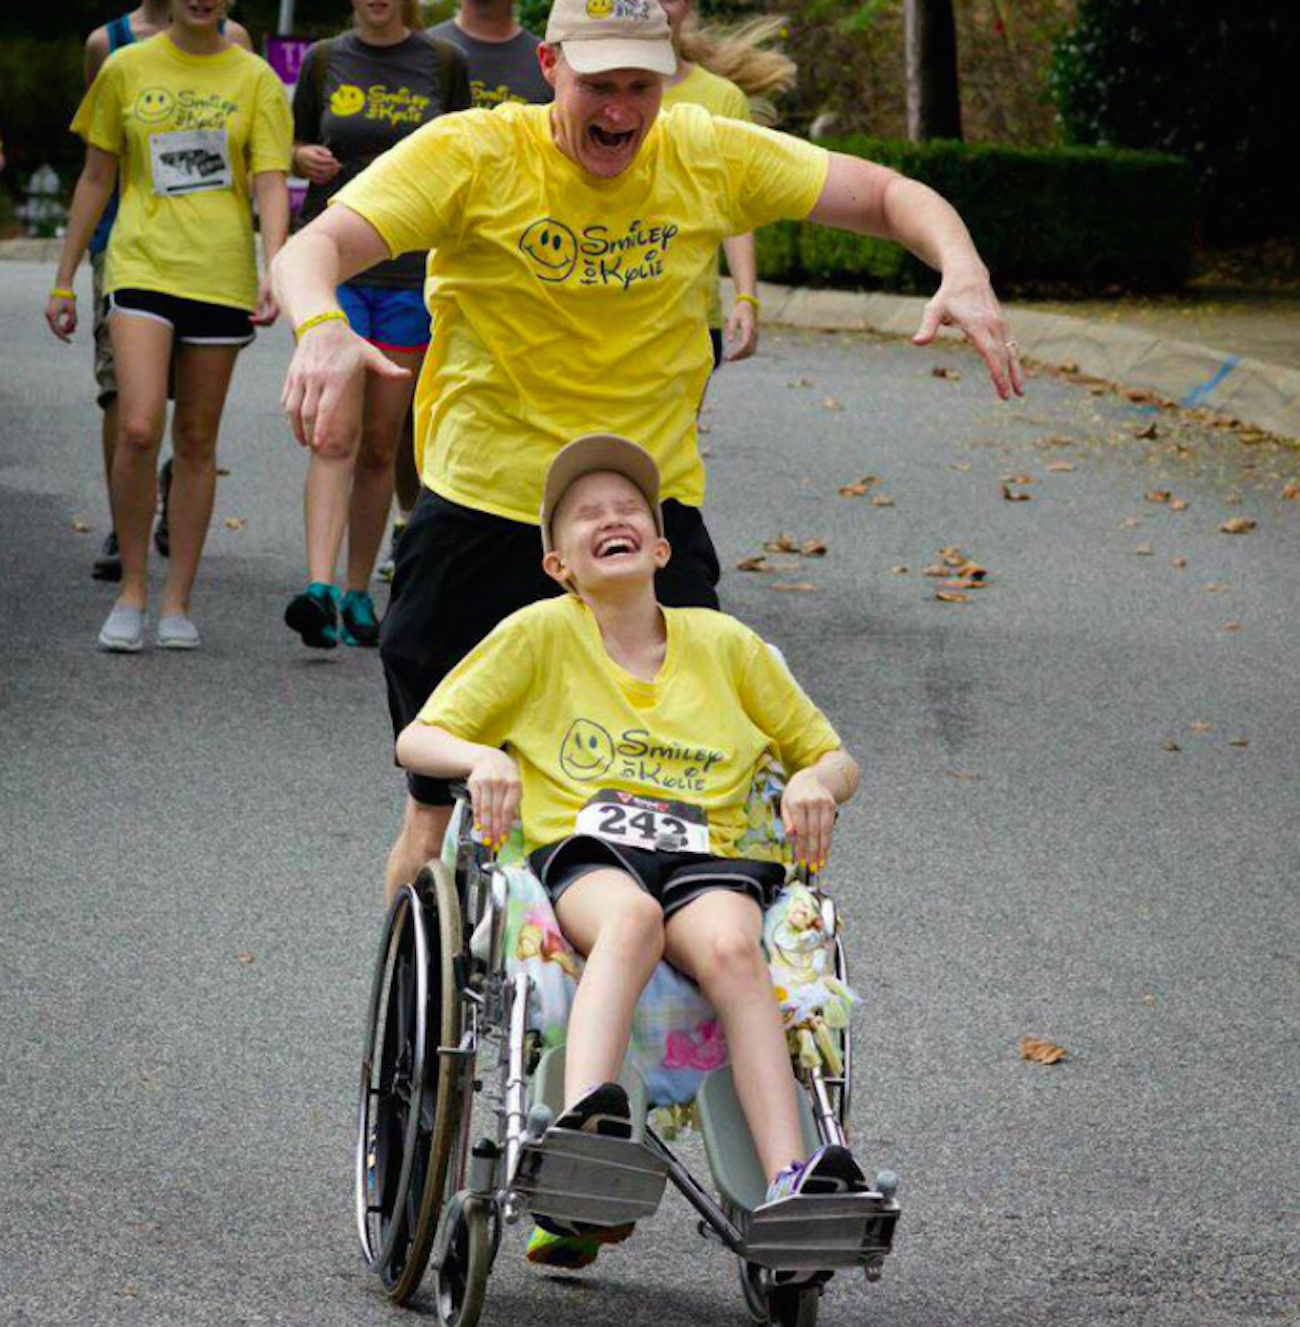 the author pushing his daughter in a wheelchair, both of them laughing together and wearing Smiley for Kylie t-shirts